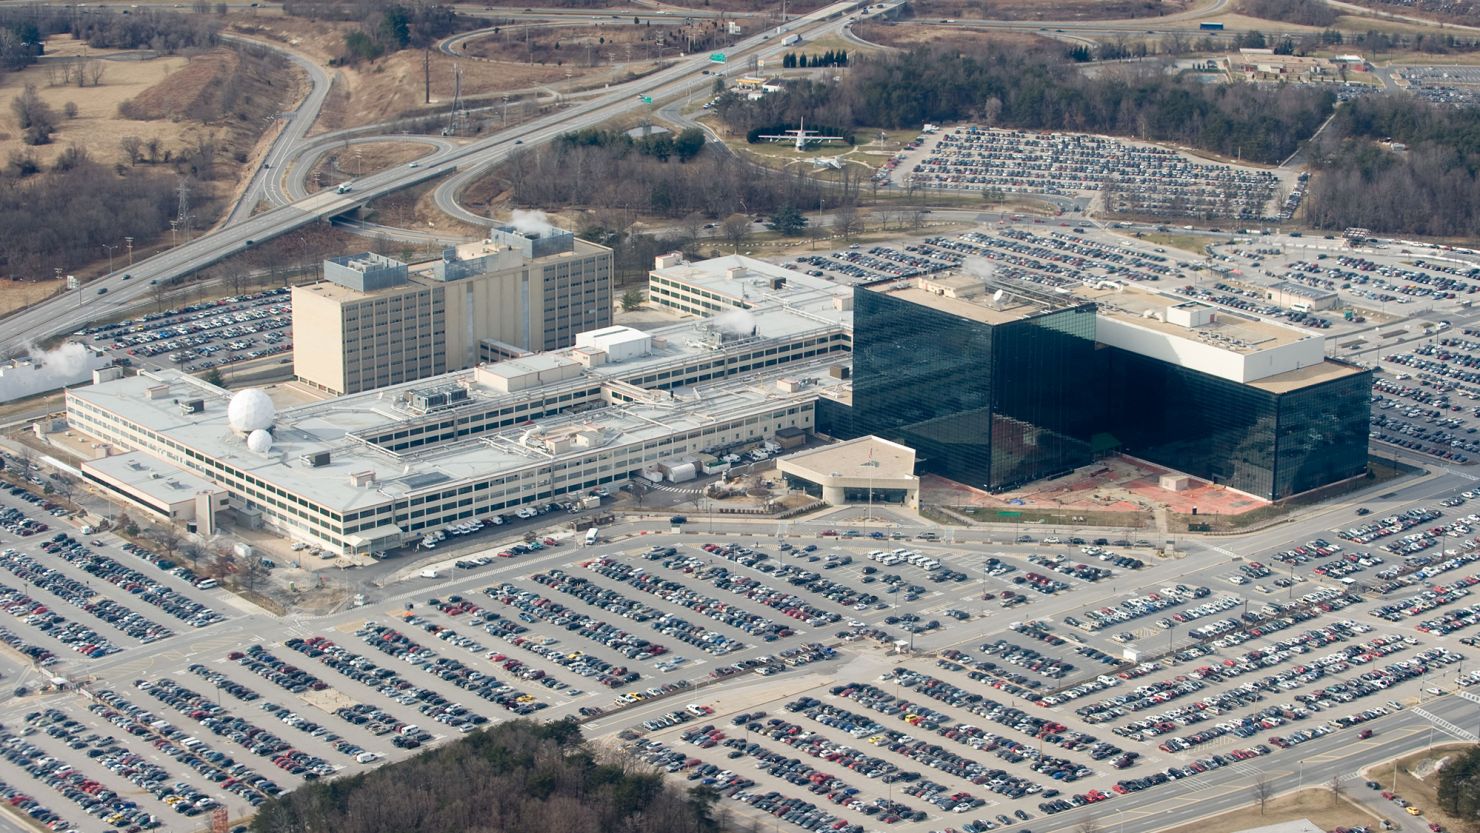 The National Security Agency (NSA) headquarters at Fort Meade, Maryland, as seen from the air, January 29, 2010.